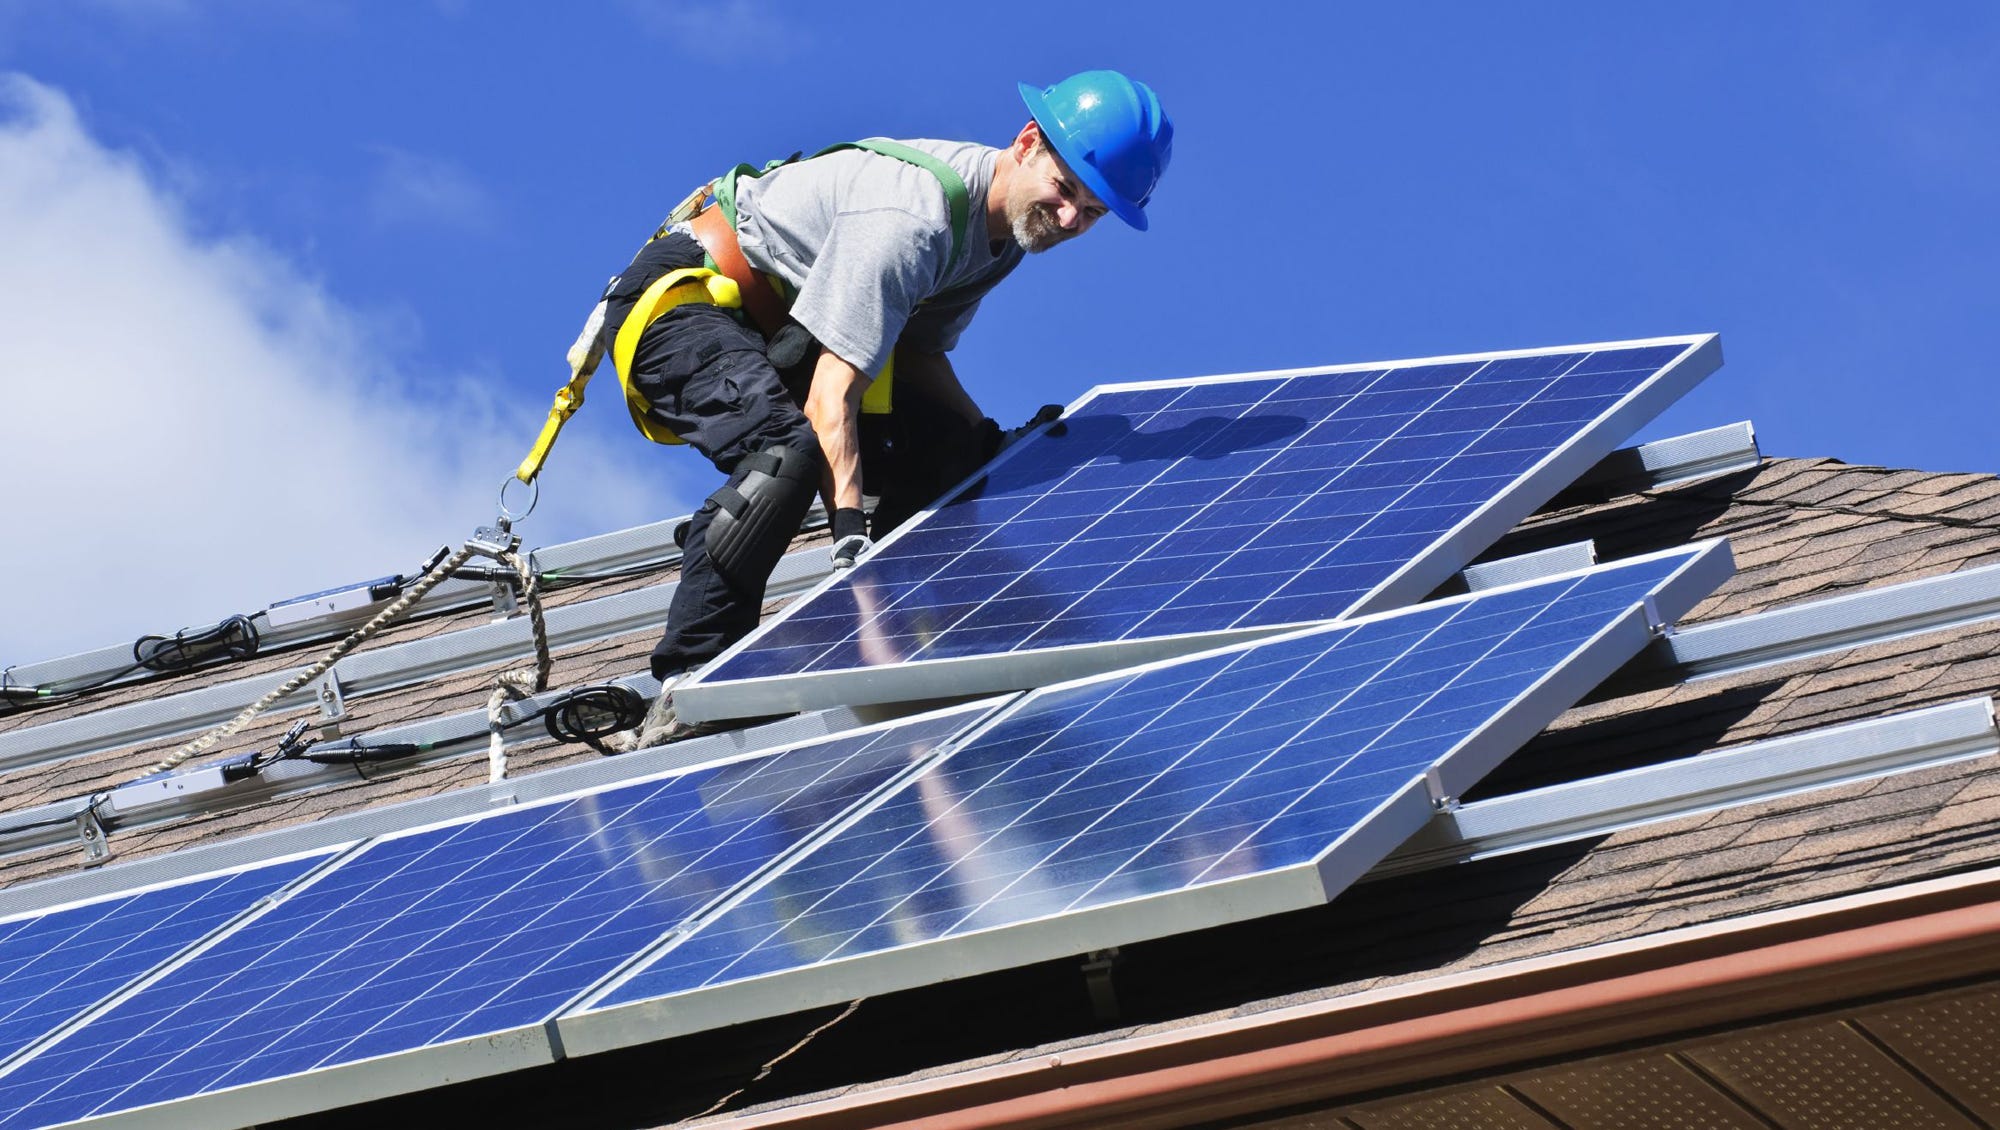 are-solar-panels-worth-it-10-things-to-consider-before-installing